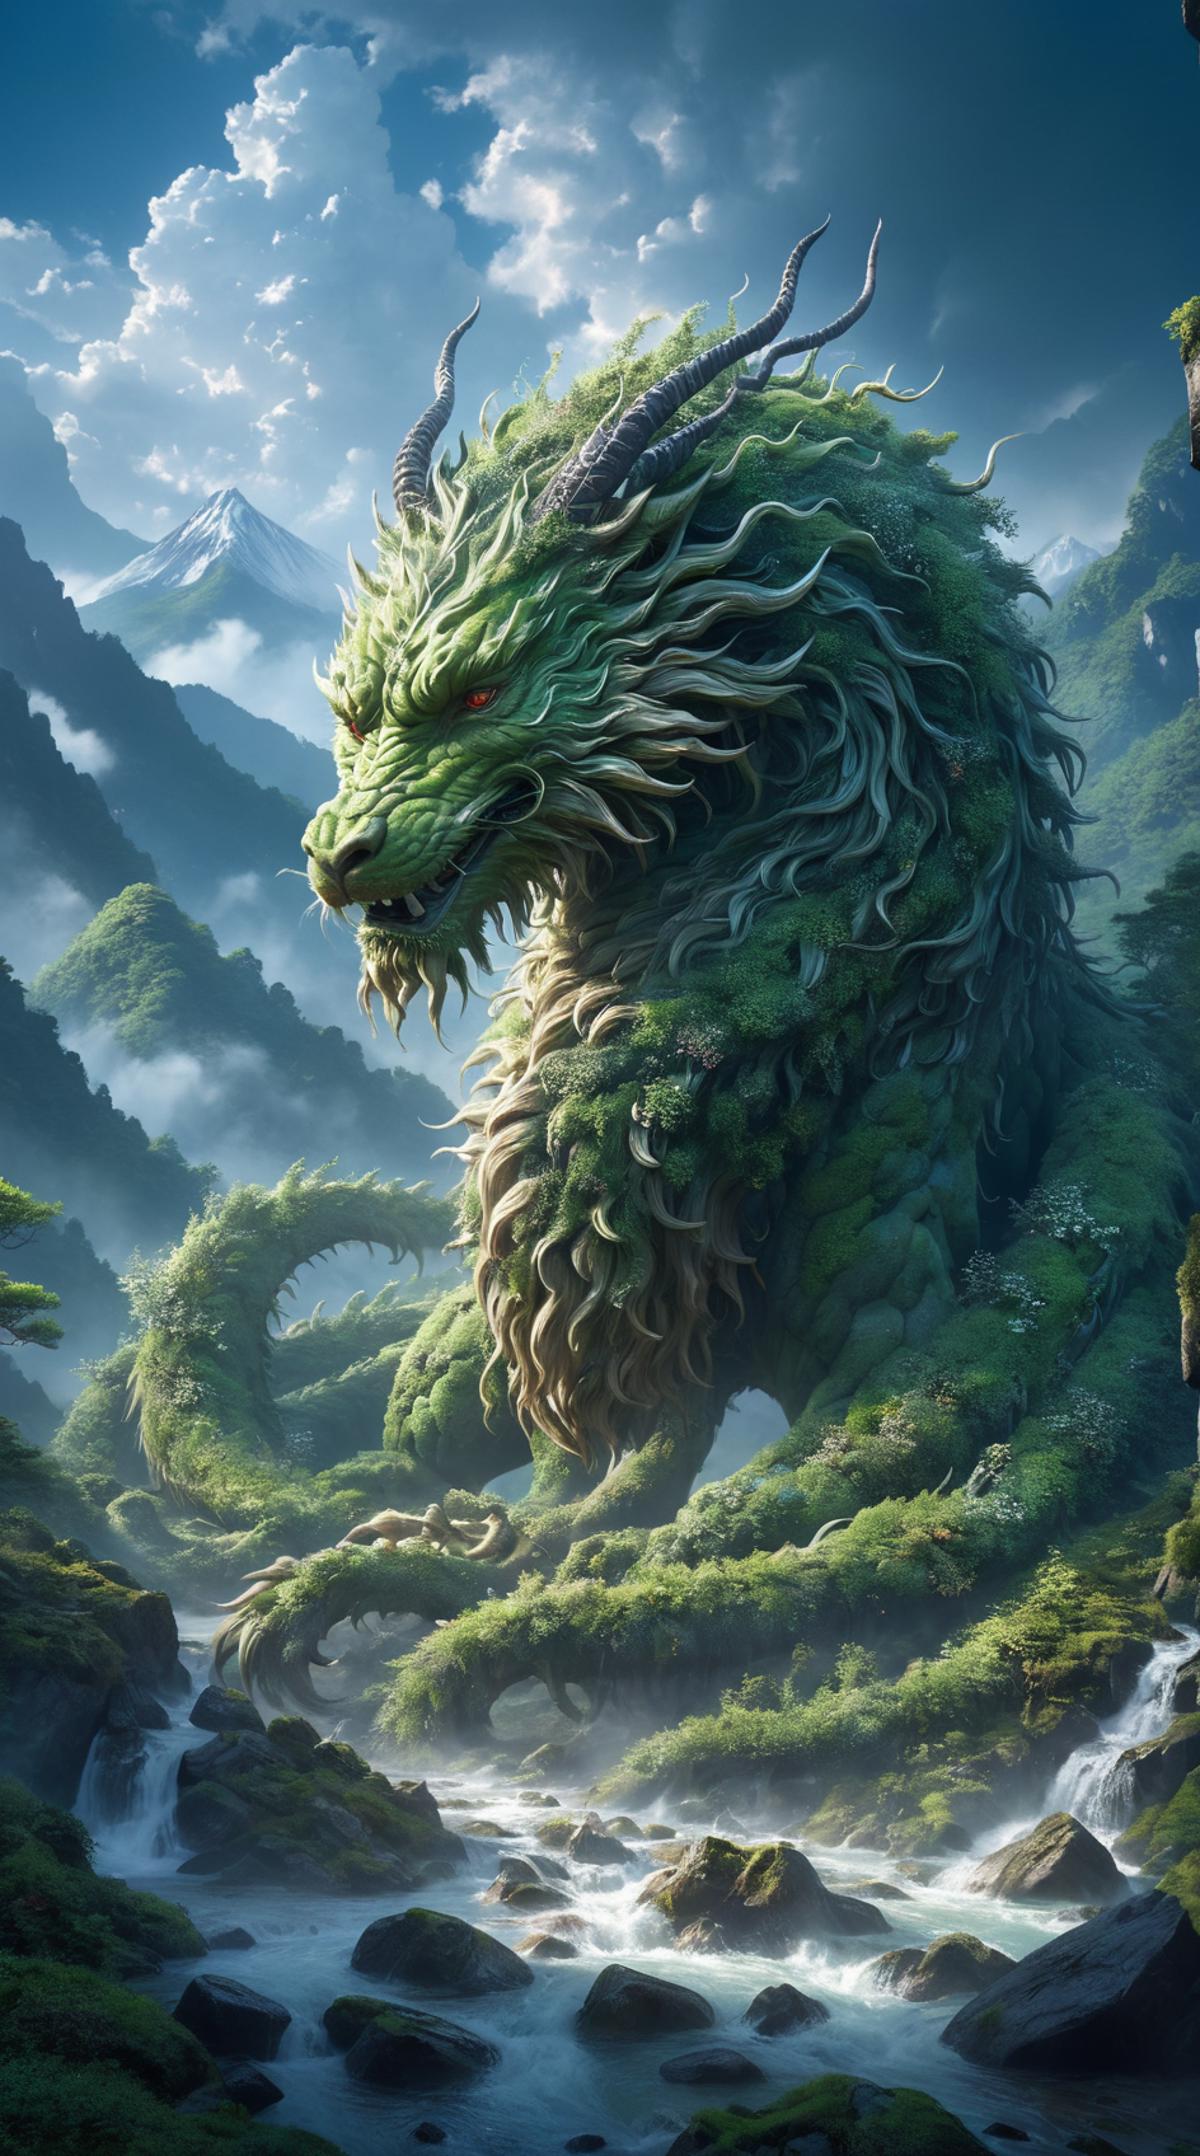 A green dragon with long hair and red eyes is sitting on top of a mountain, surrounded by lush greenery.